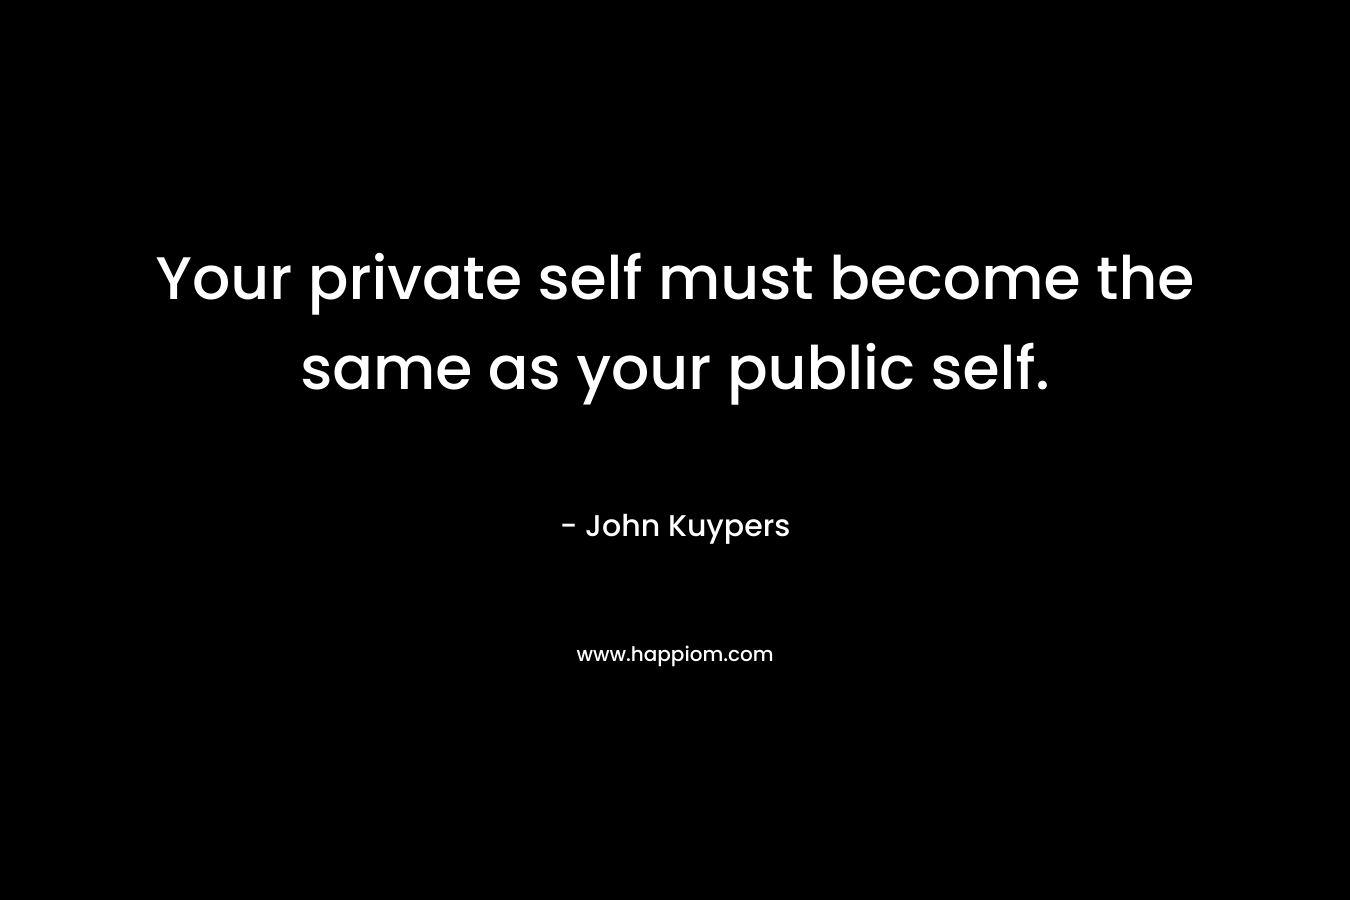 Your private self must become the same as your public self. – John Kuypers